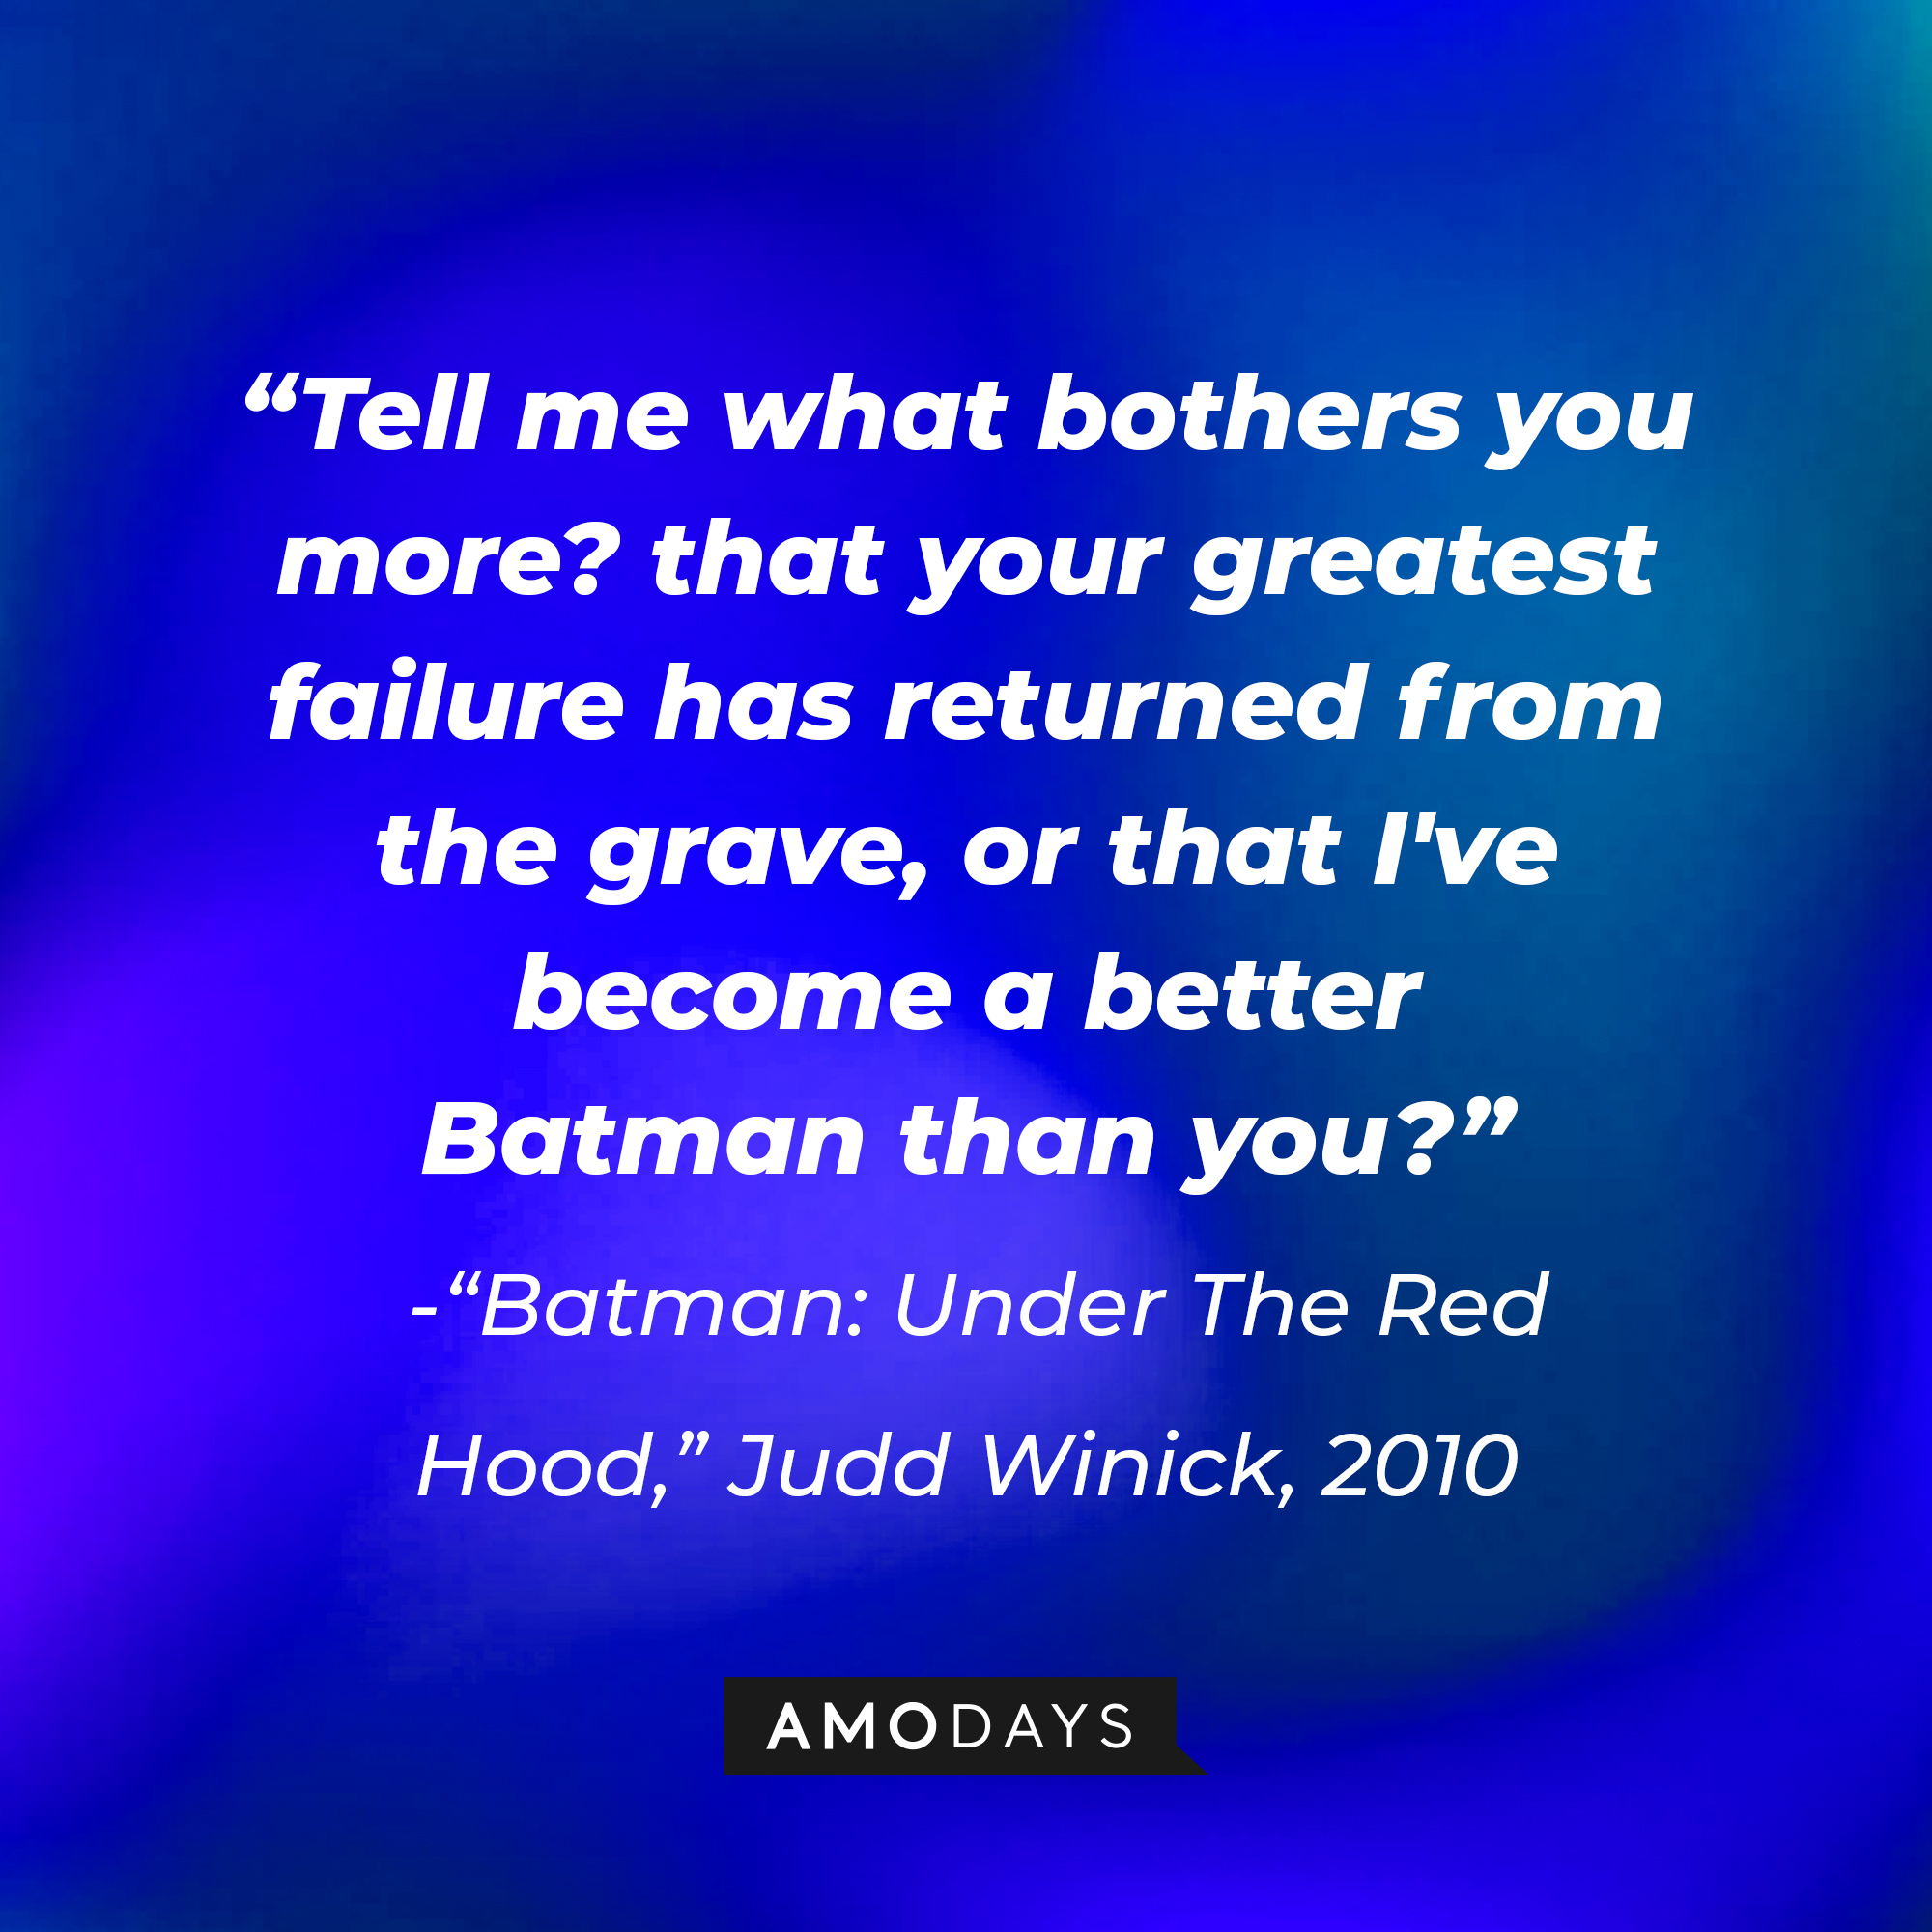 A quote from "Batman: Under The Red Hood," Judd Winick, 2010 "Tell me what bothers you more? that your greatest failure has returned from the grave, or that I've become a better Batman than you?" | Source: AmoDays